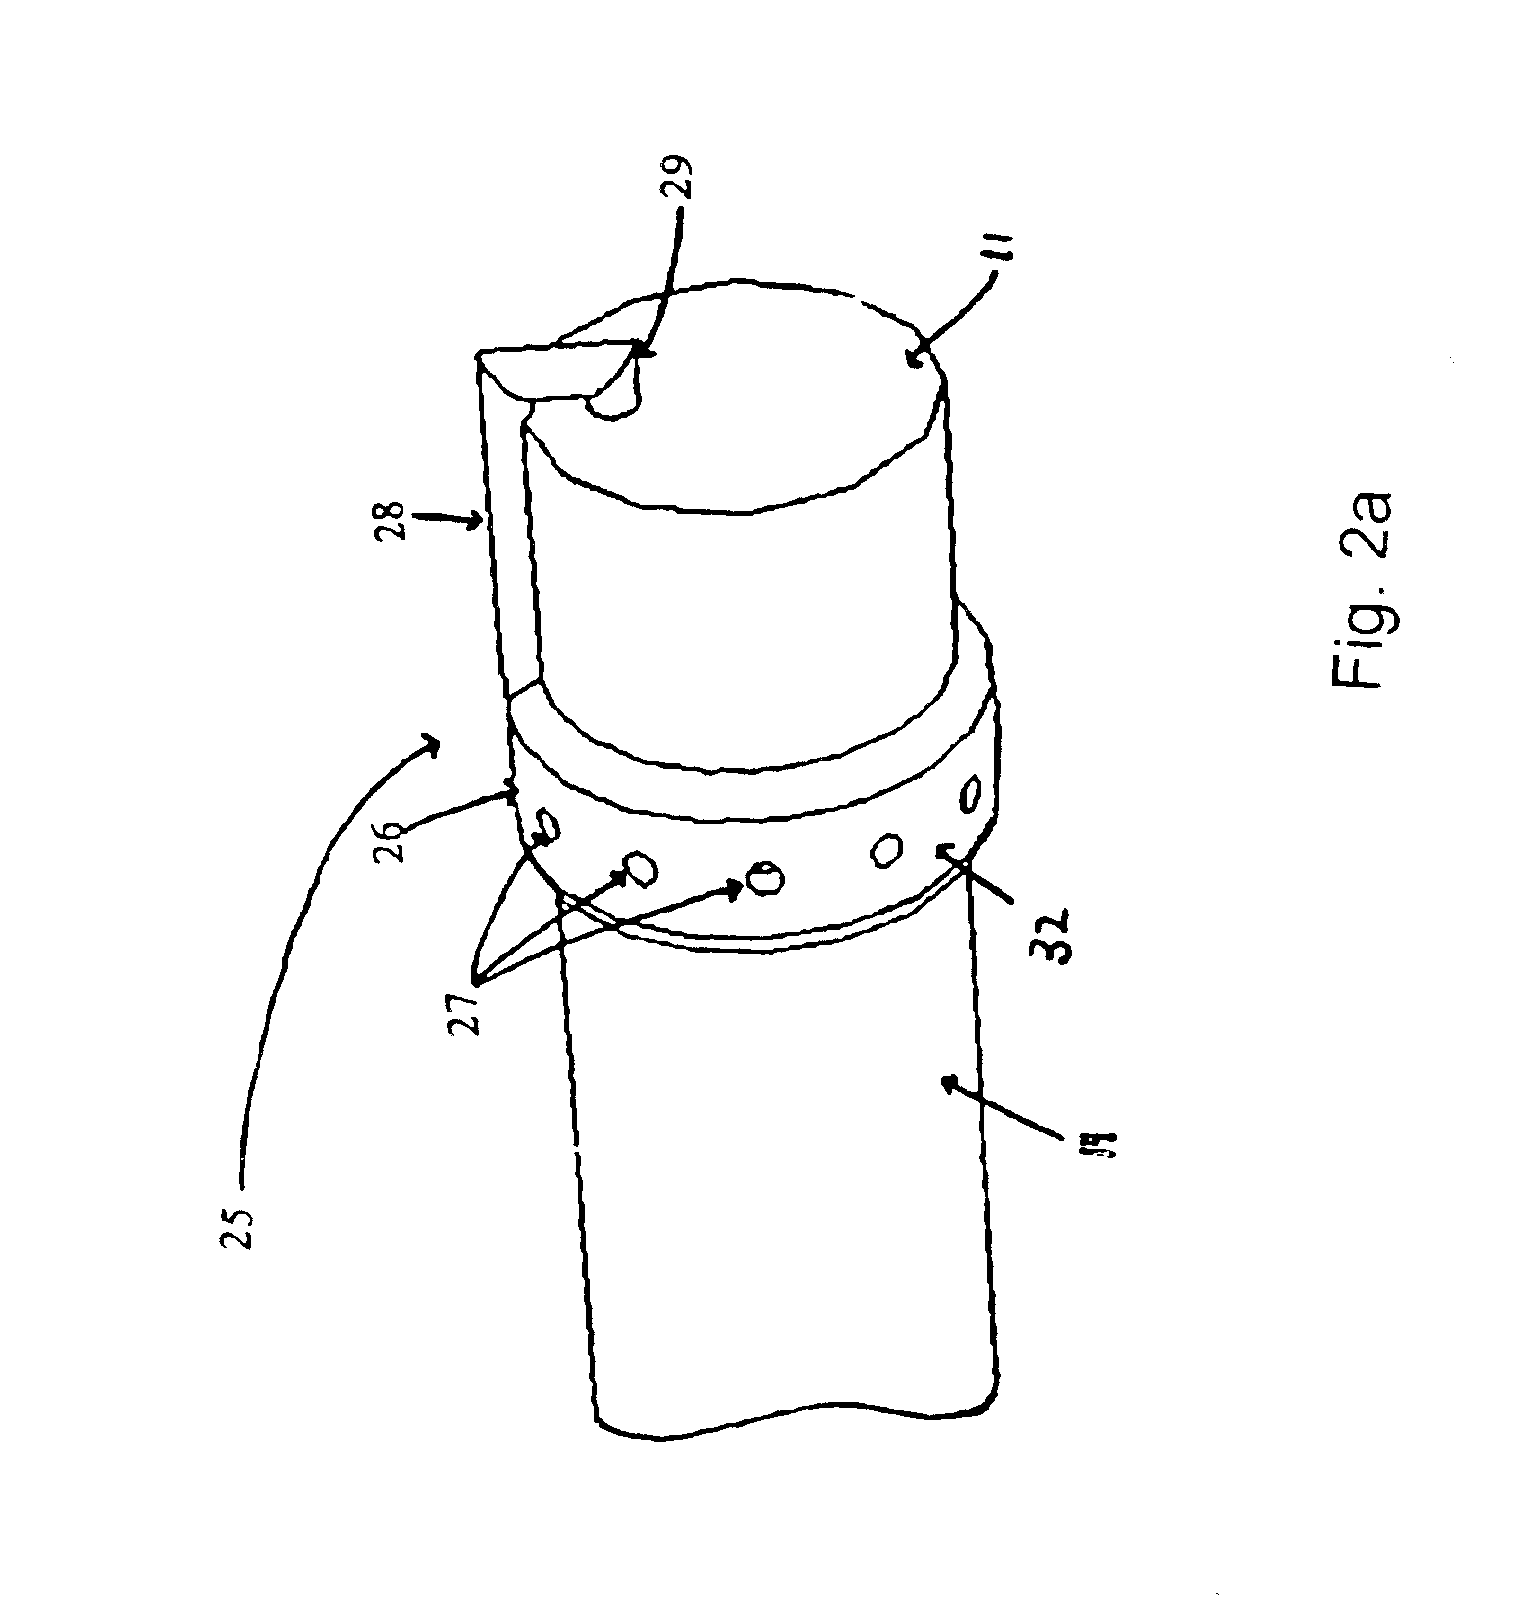 Systems and methods for providing gastrointestinal pain management